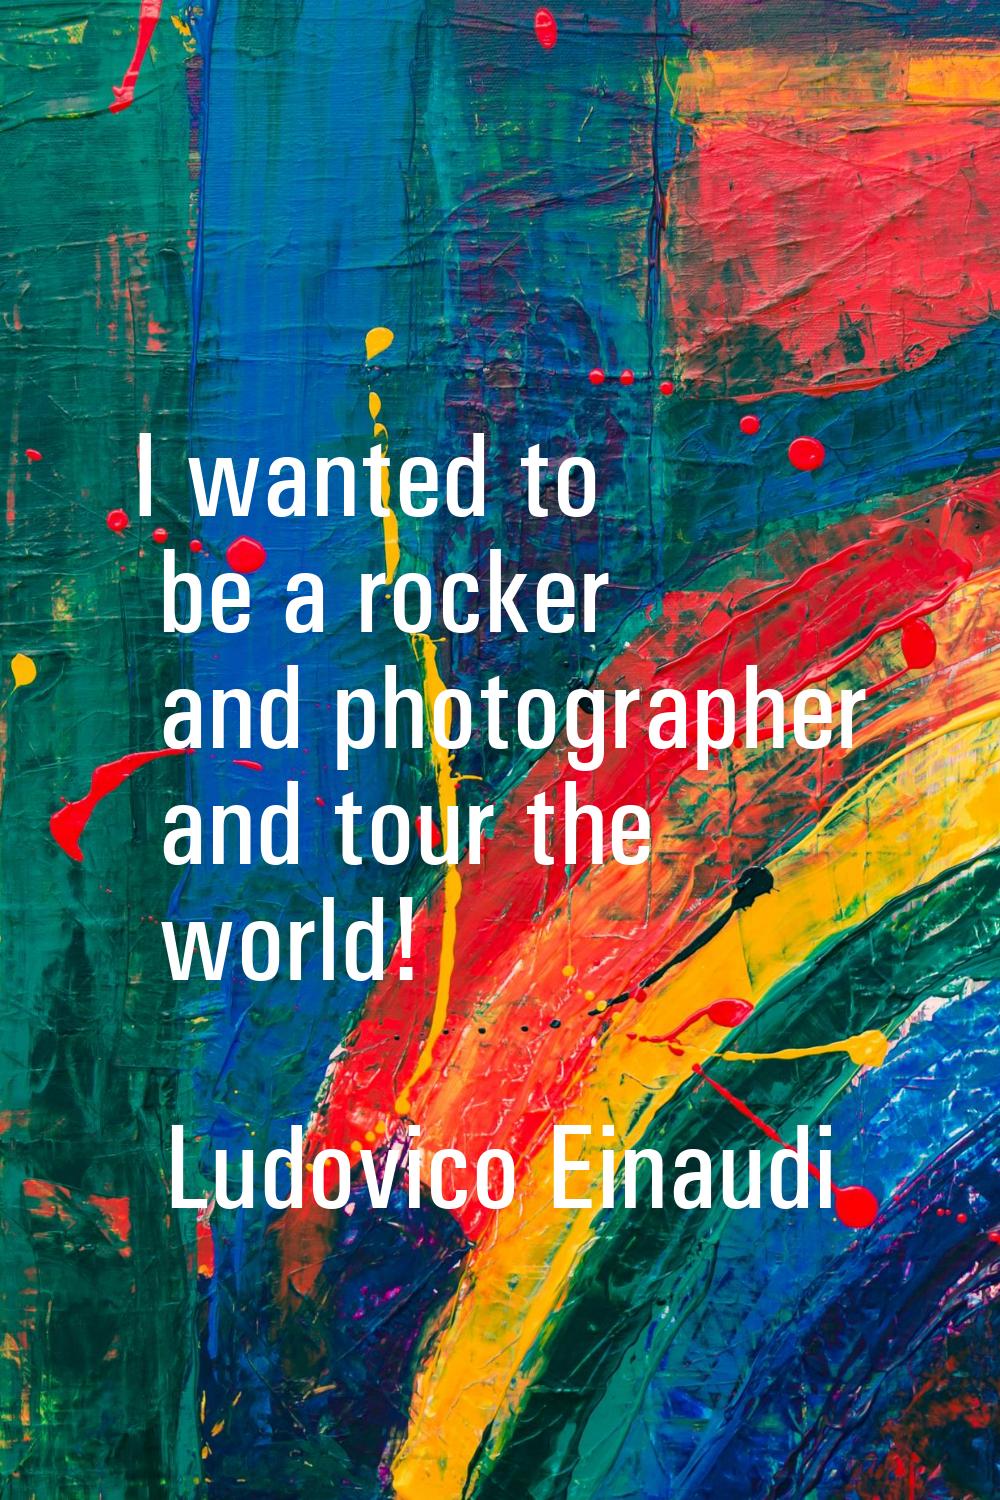 I wanted to be a rocker and photographer and tour the world!